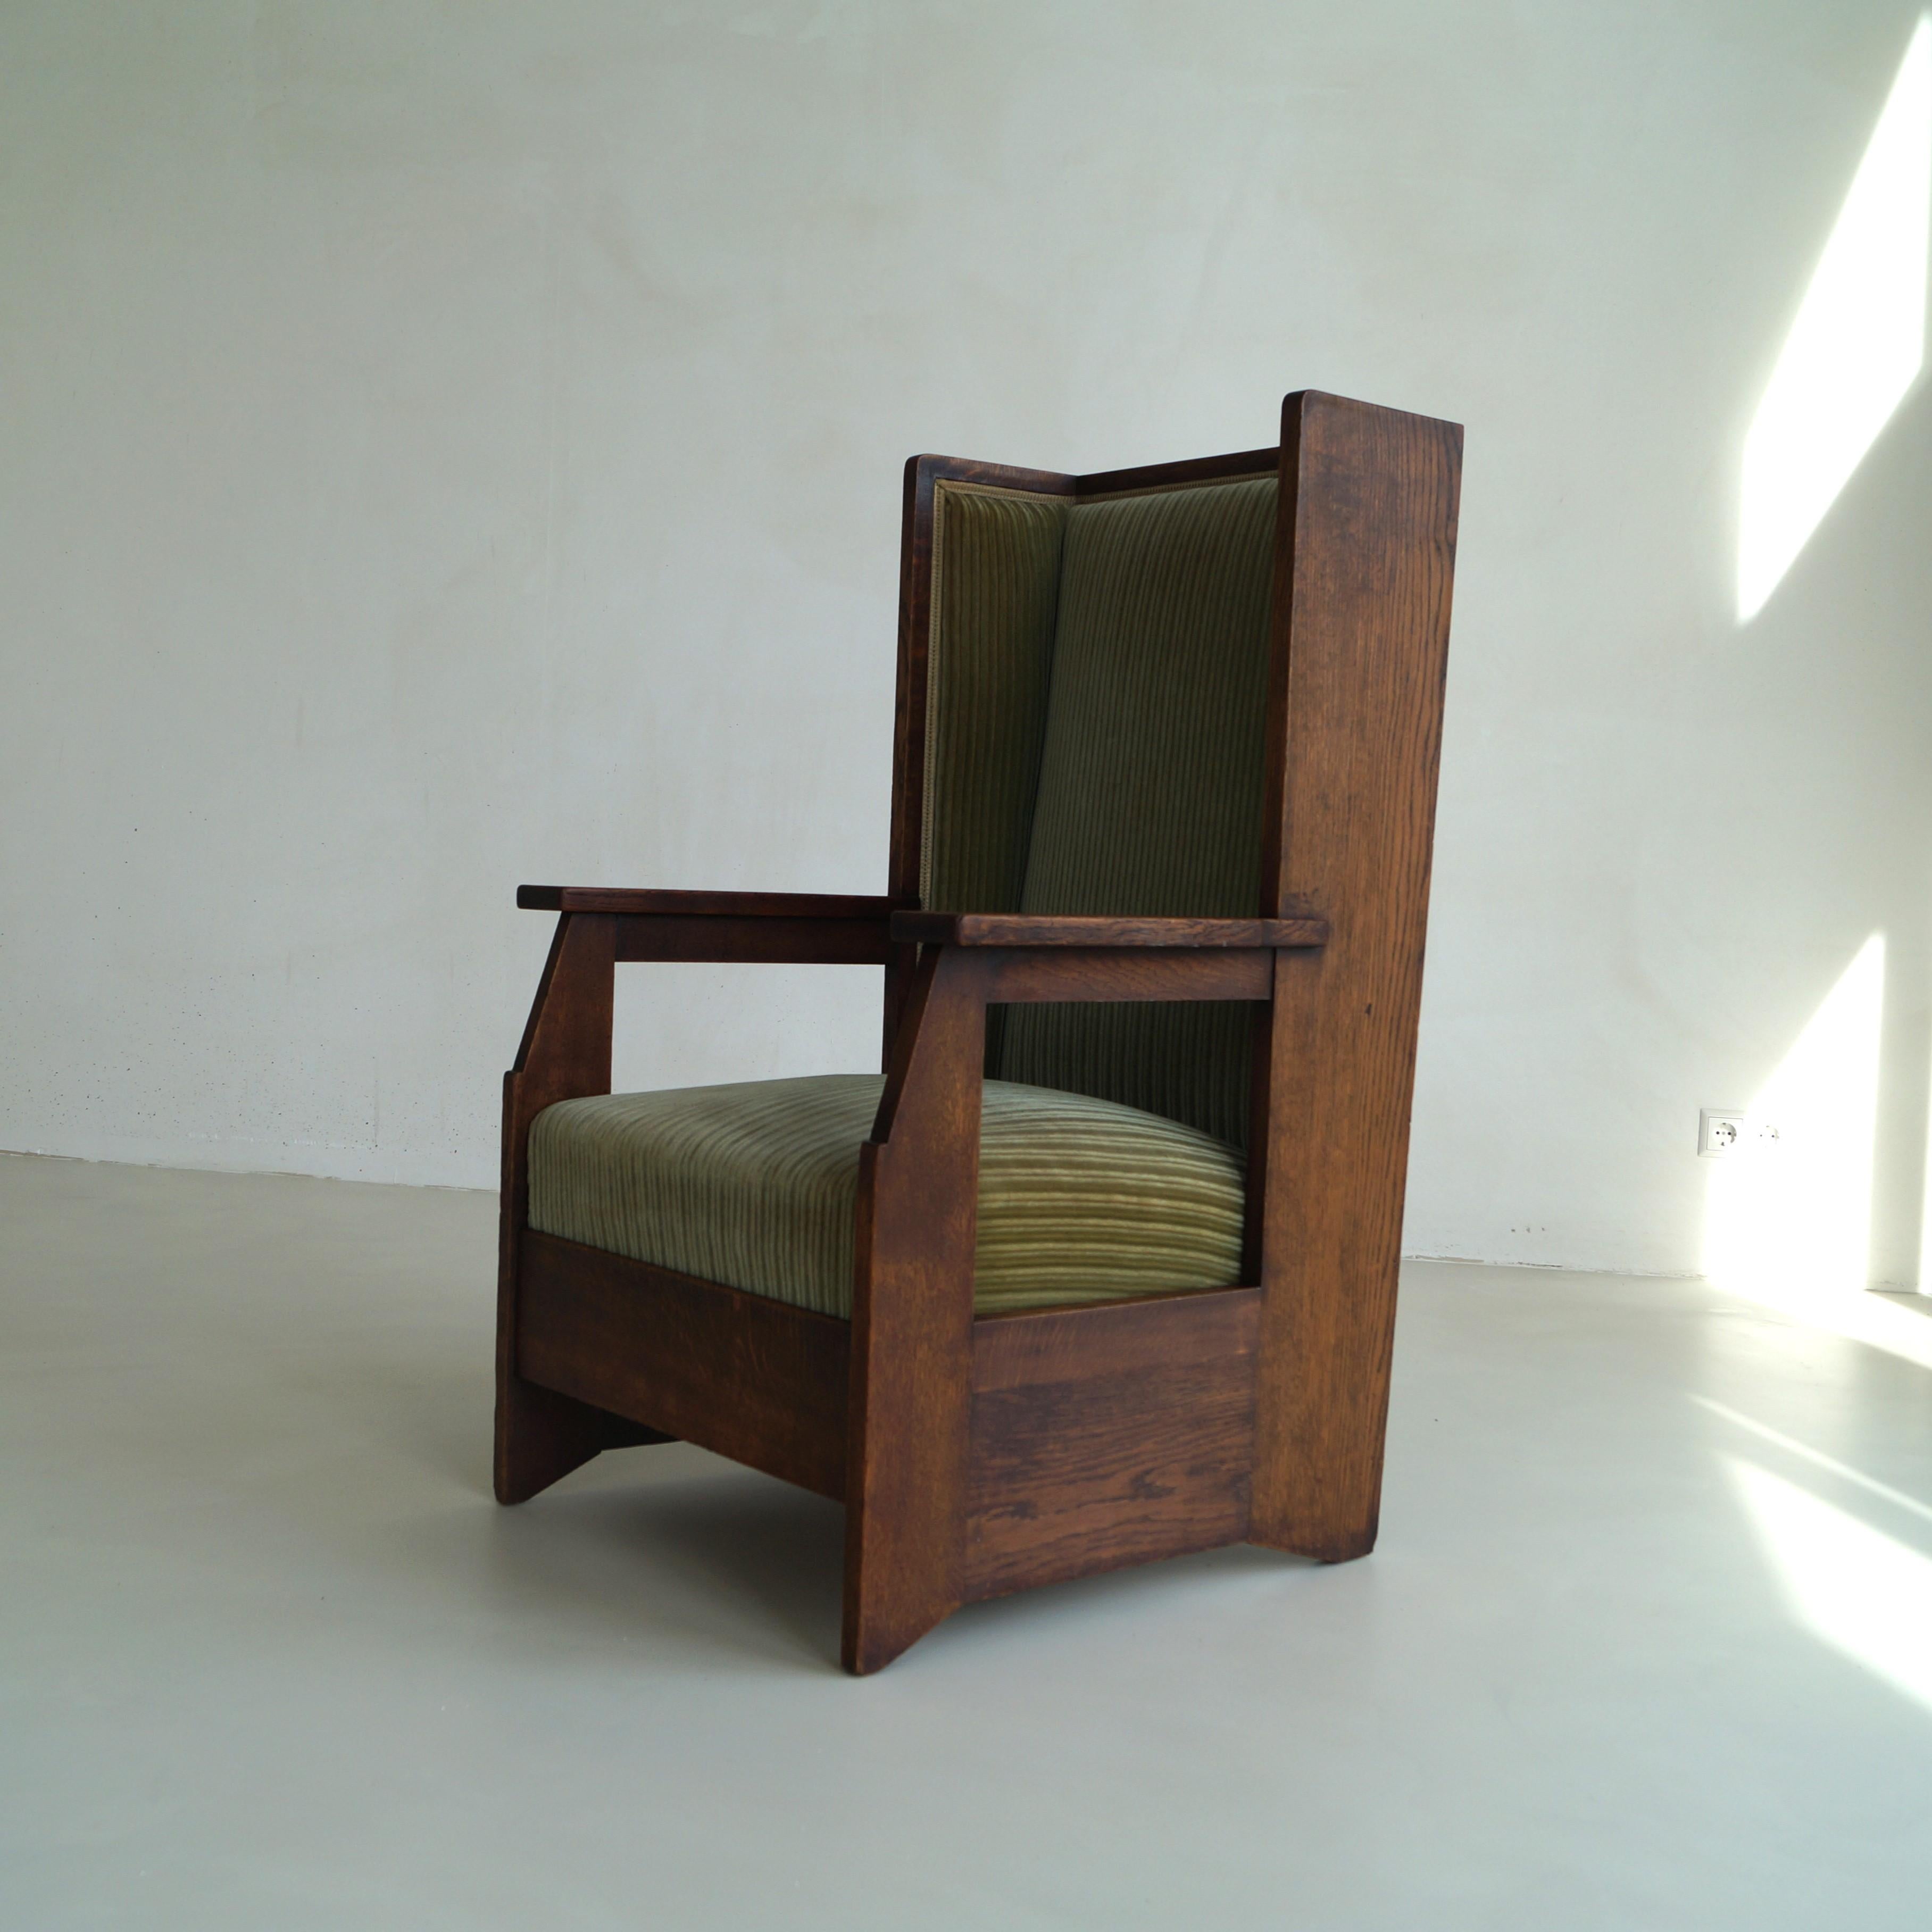 Dutch Art Deco Haagse School high back chair by Hendrik Wouda for Pander, 1924 For Sale 4